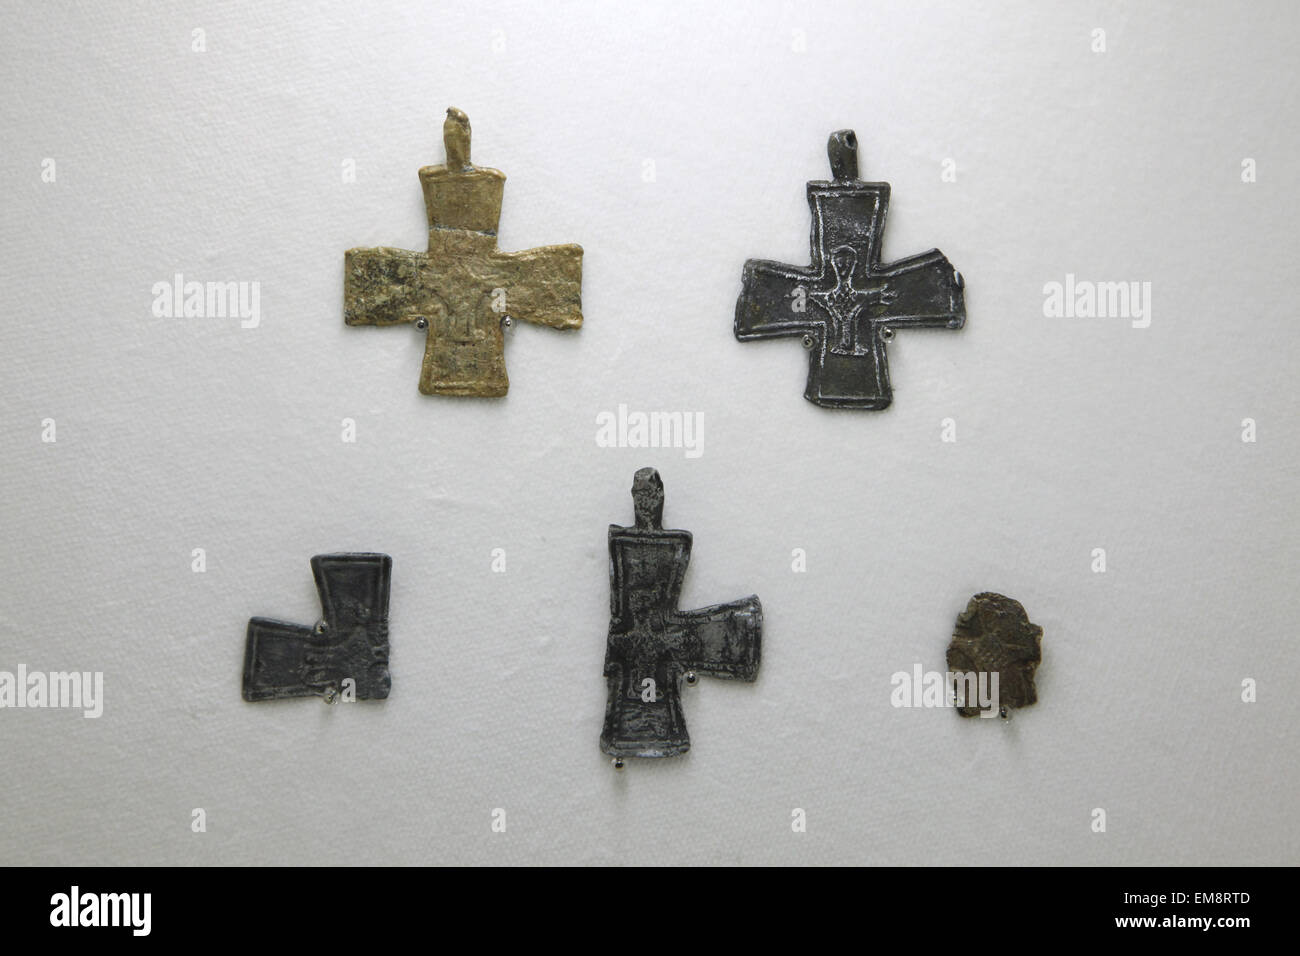 Great Moravian leaden and bronze crosses from the 9th century displayed at the exhibition 'Great Moravia and the Beginnings of Christianity' in Prague, Czech Republic. The crosses were discovered in Pohansko at Breclav and Dolni Vestonice in South Moravia, Czech Republic. The exhibition presenting medieval treasures and original artefacts of the first Slavic state runs in Prague Castle till June 28, 2015. Stock Photo